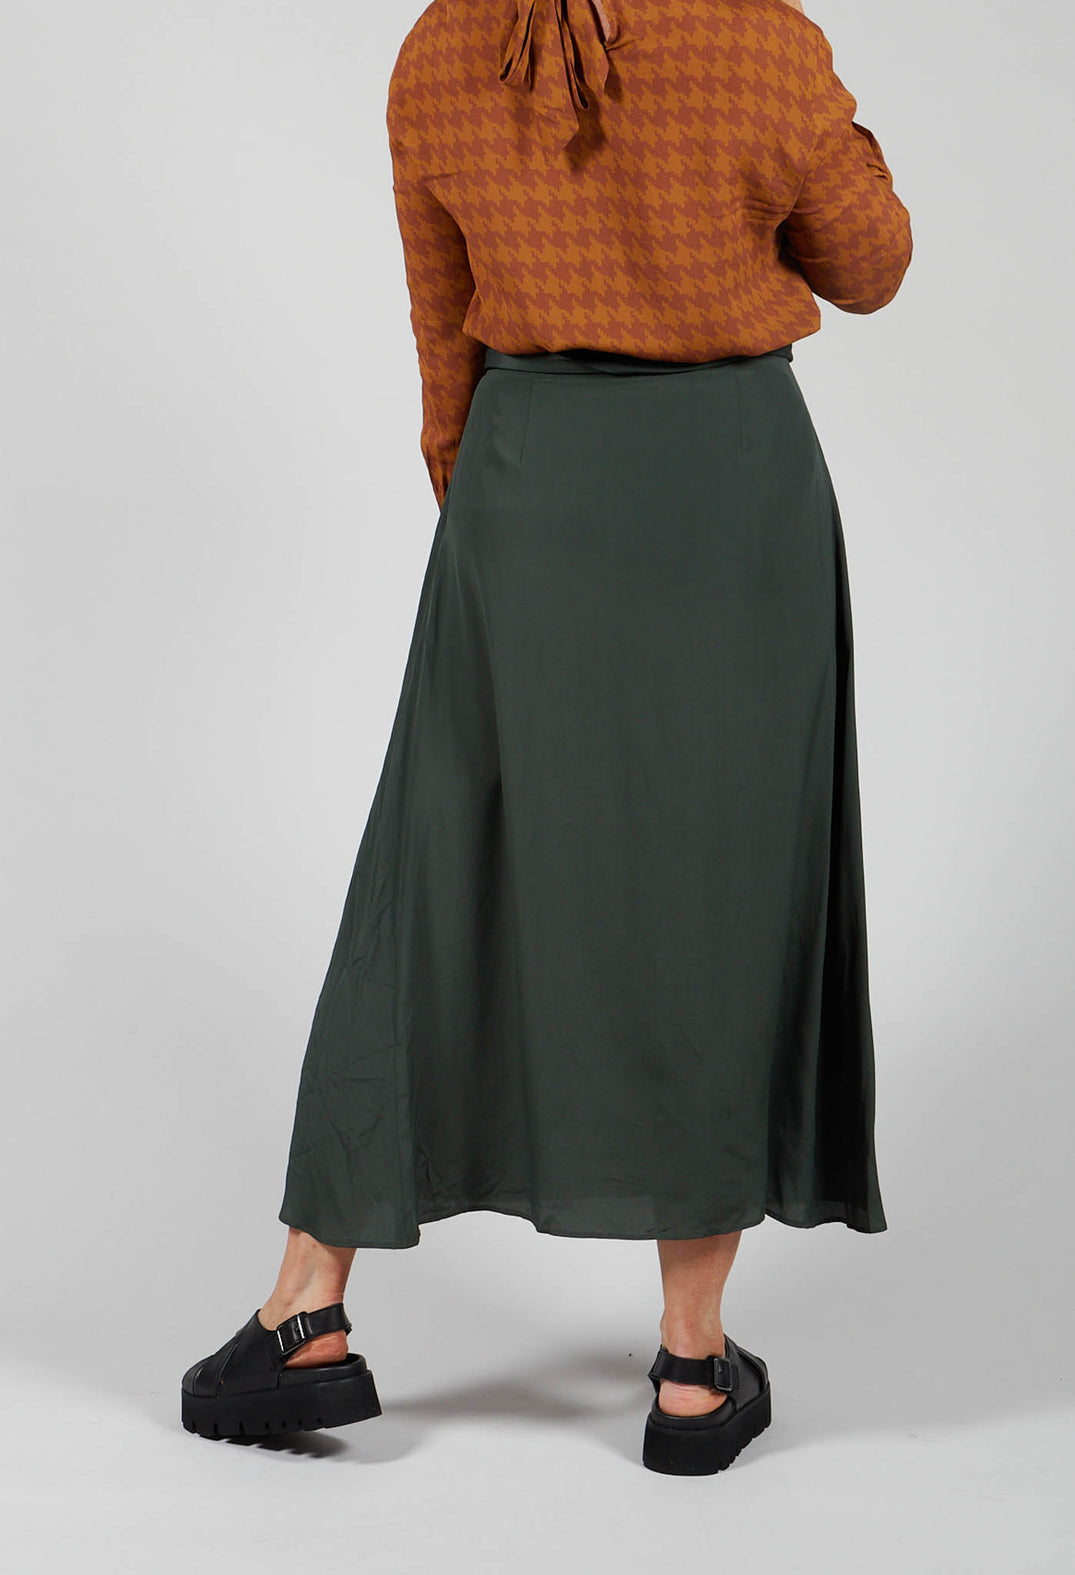 Lightweight Pleated Skirt with Sash in Mirto